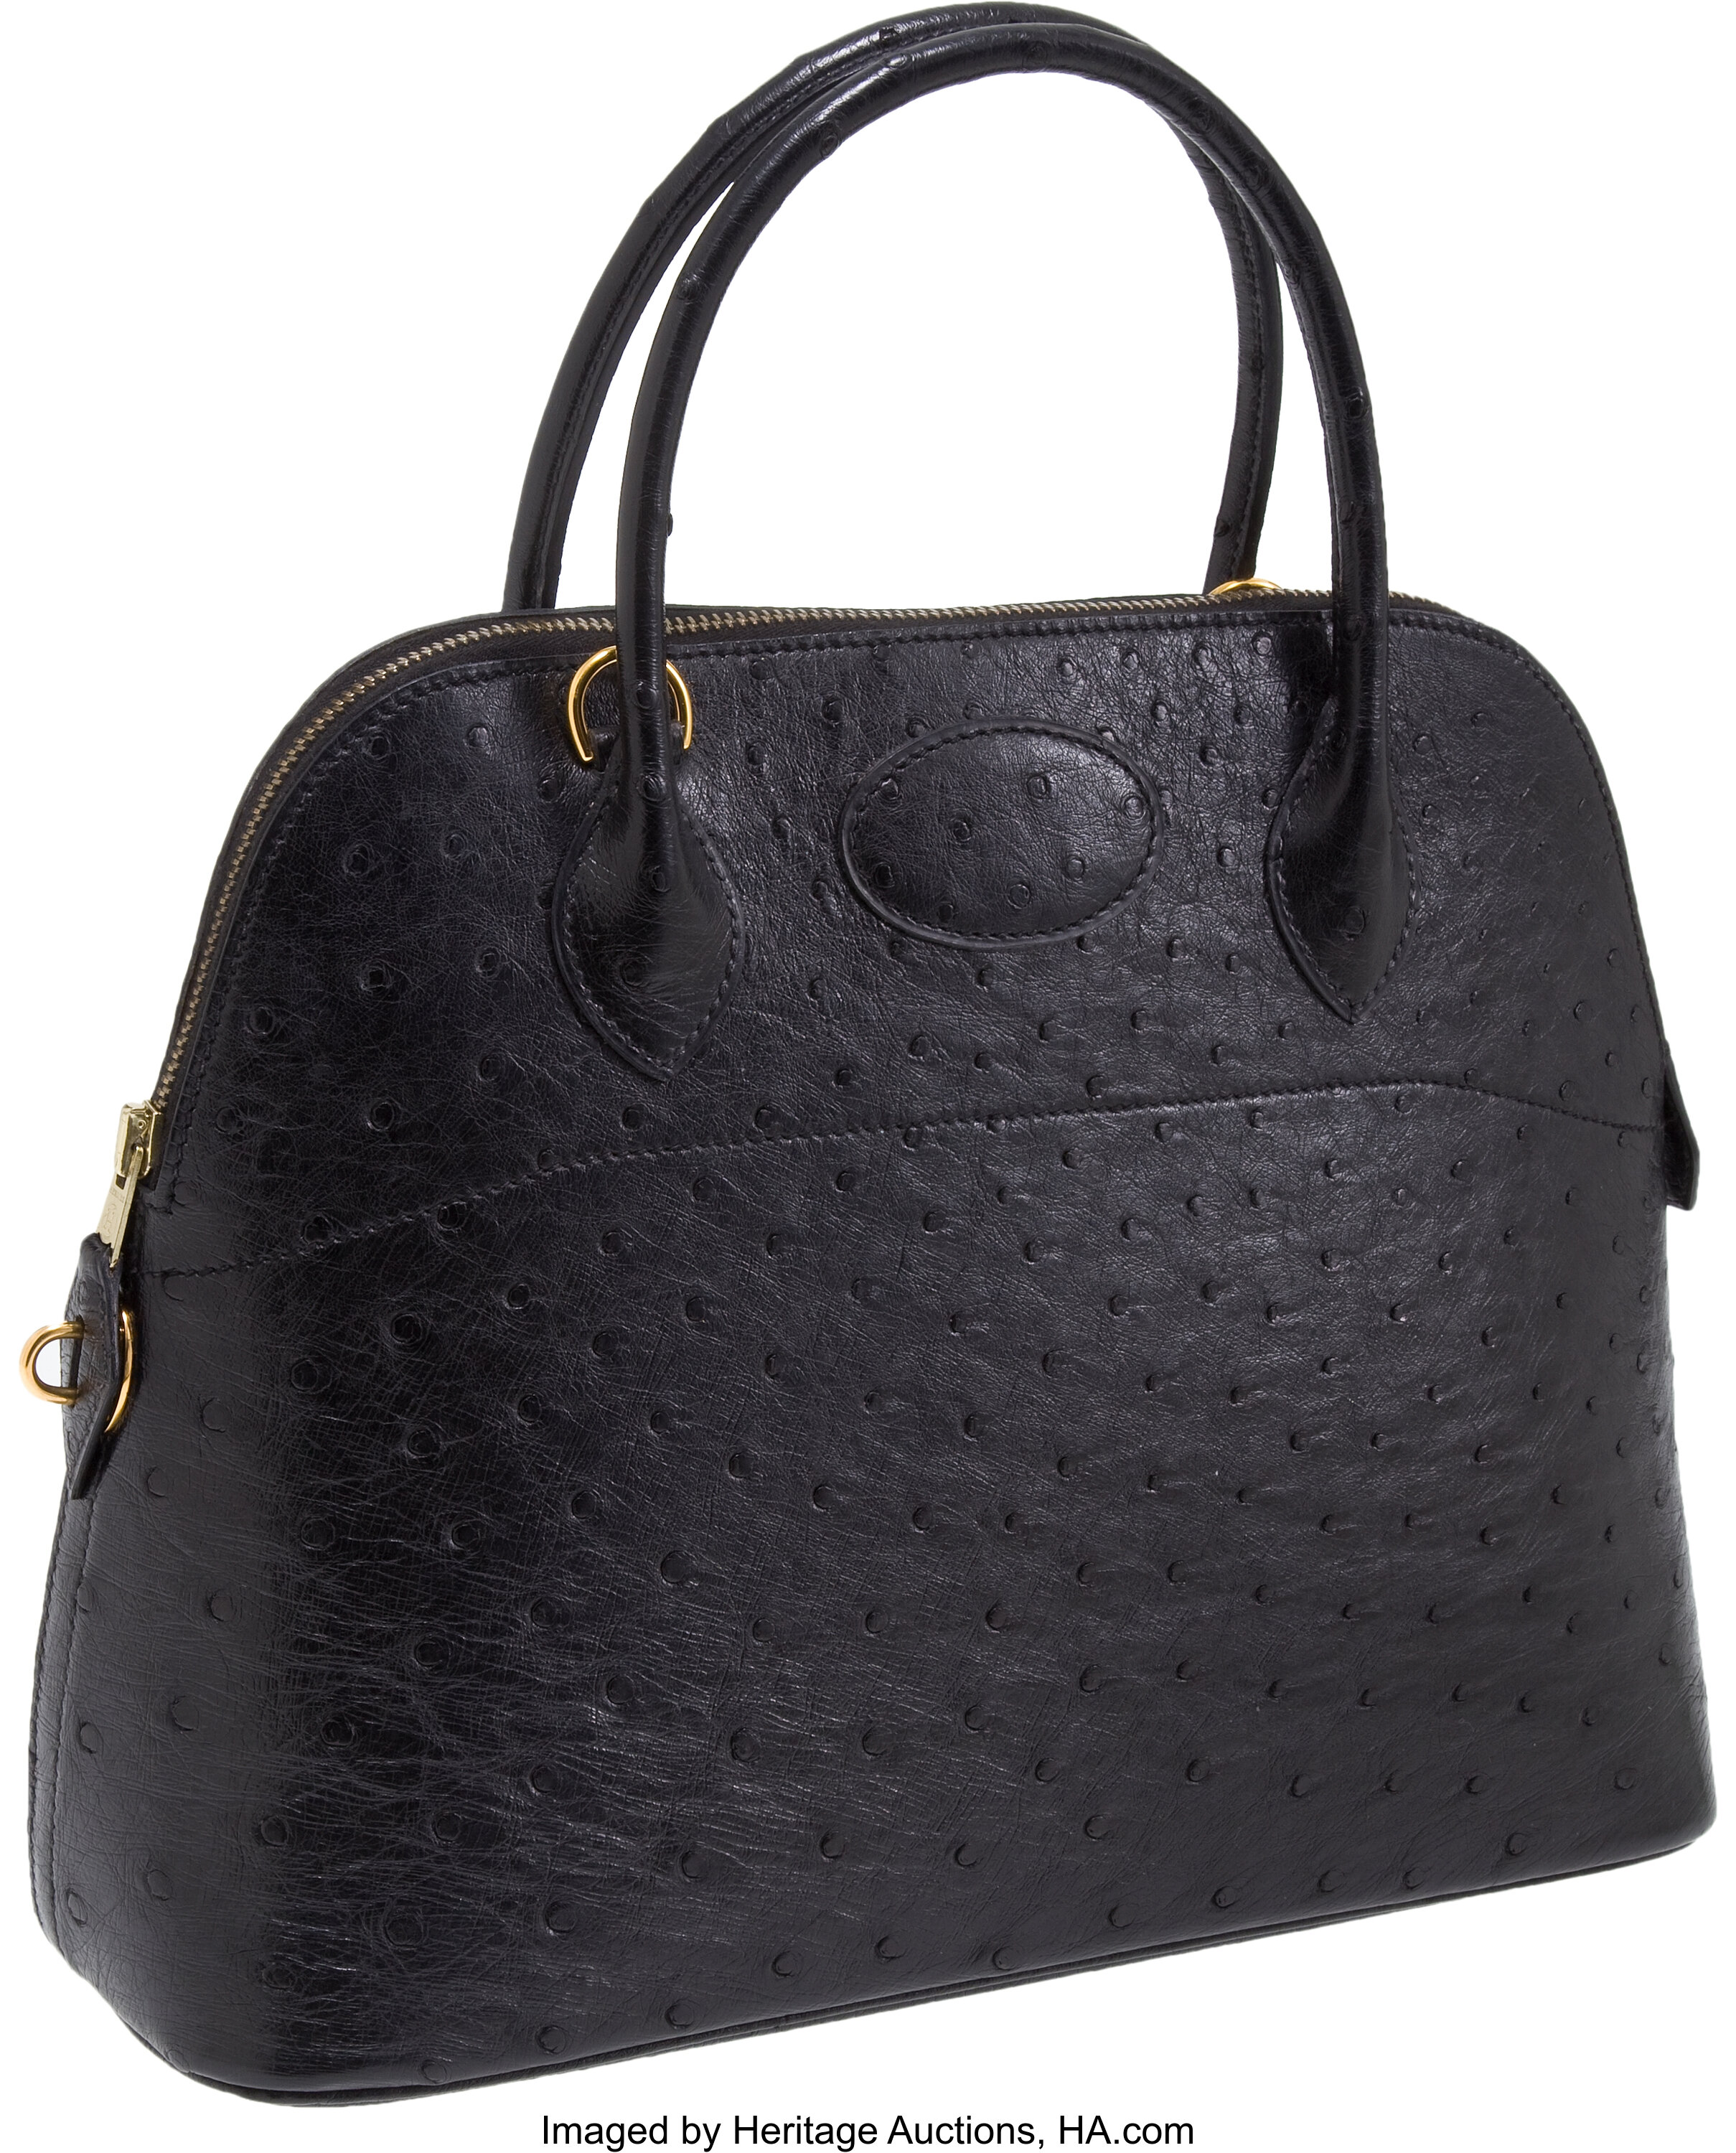 Sold at Auction: HERMES - Bolide Ostrich Leather Bag